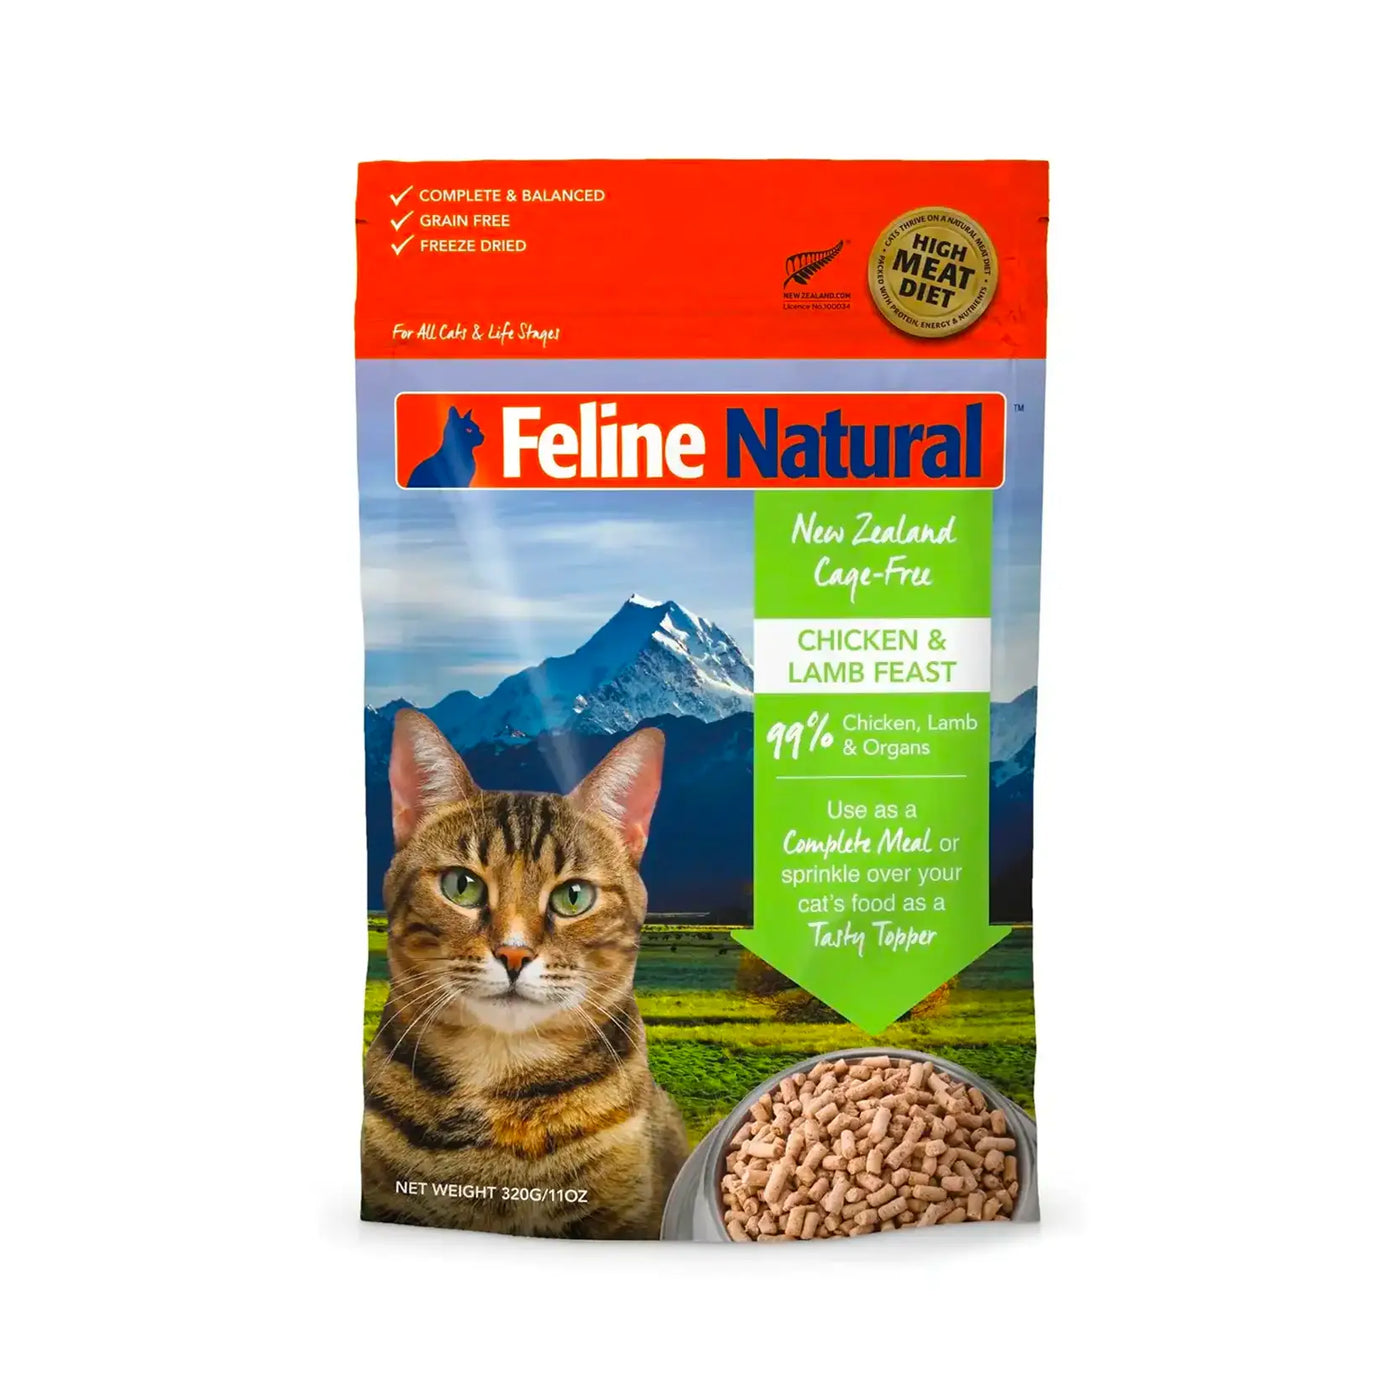 Feline Natural Freeze Dried Cat Food - Chicken And Lamb Feast 320g